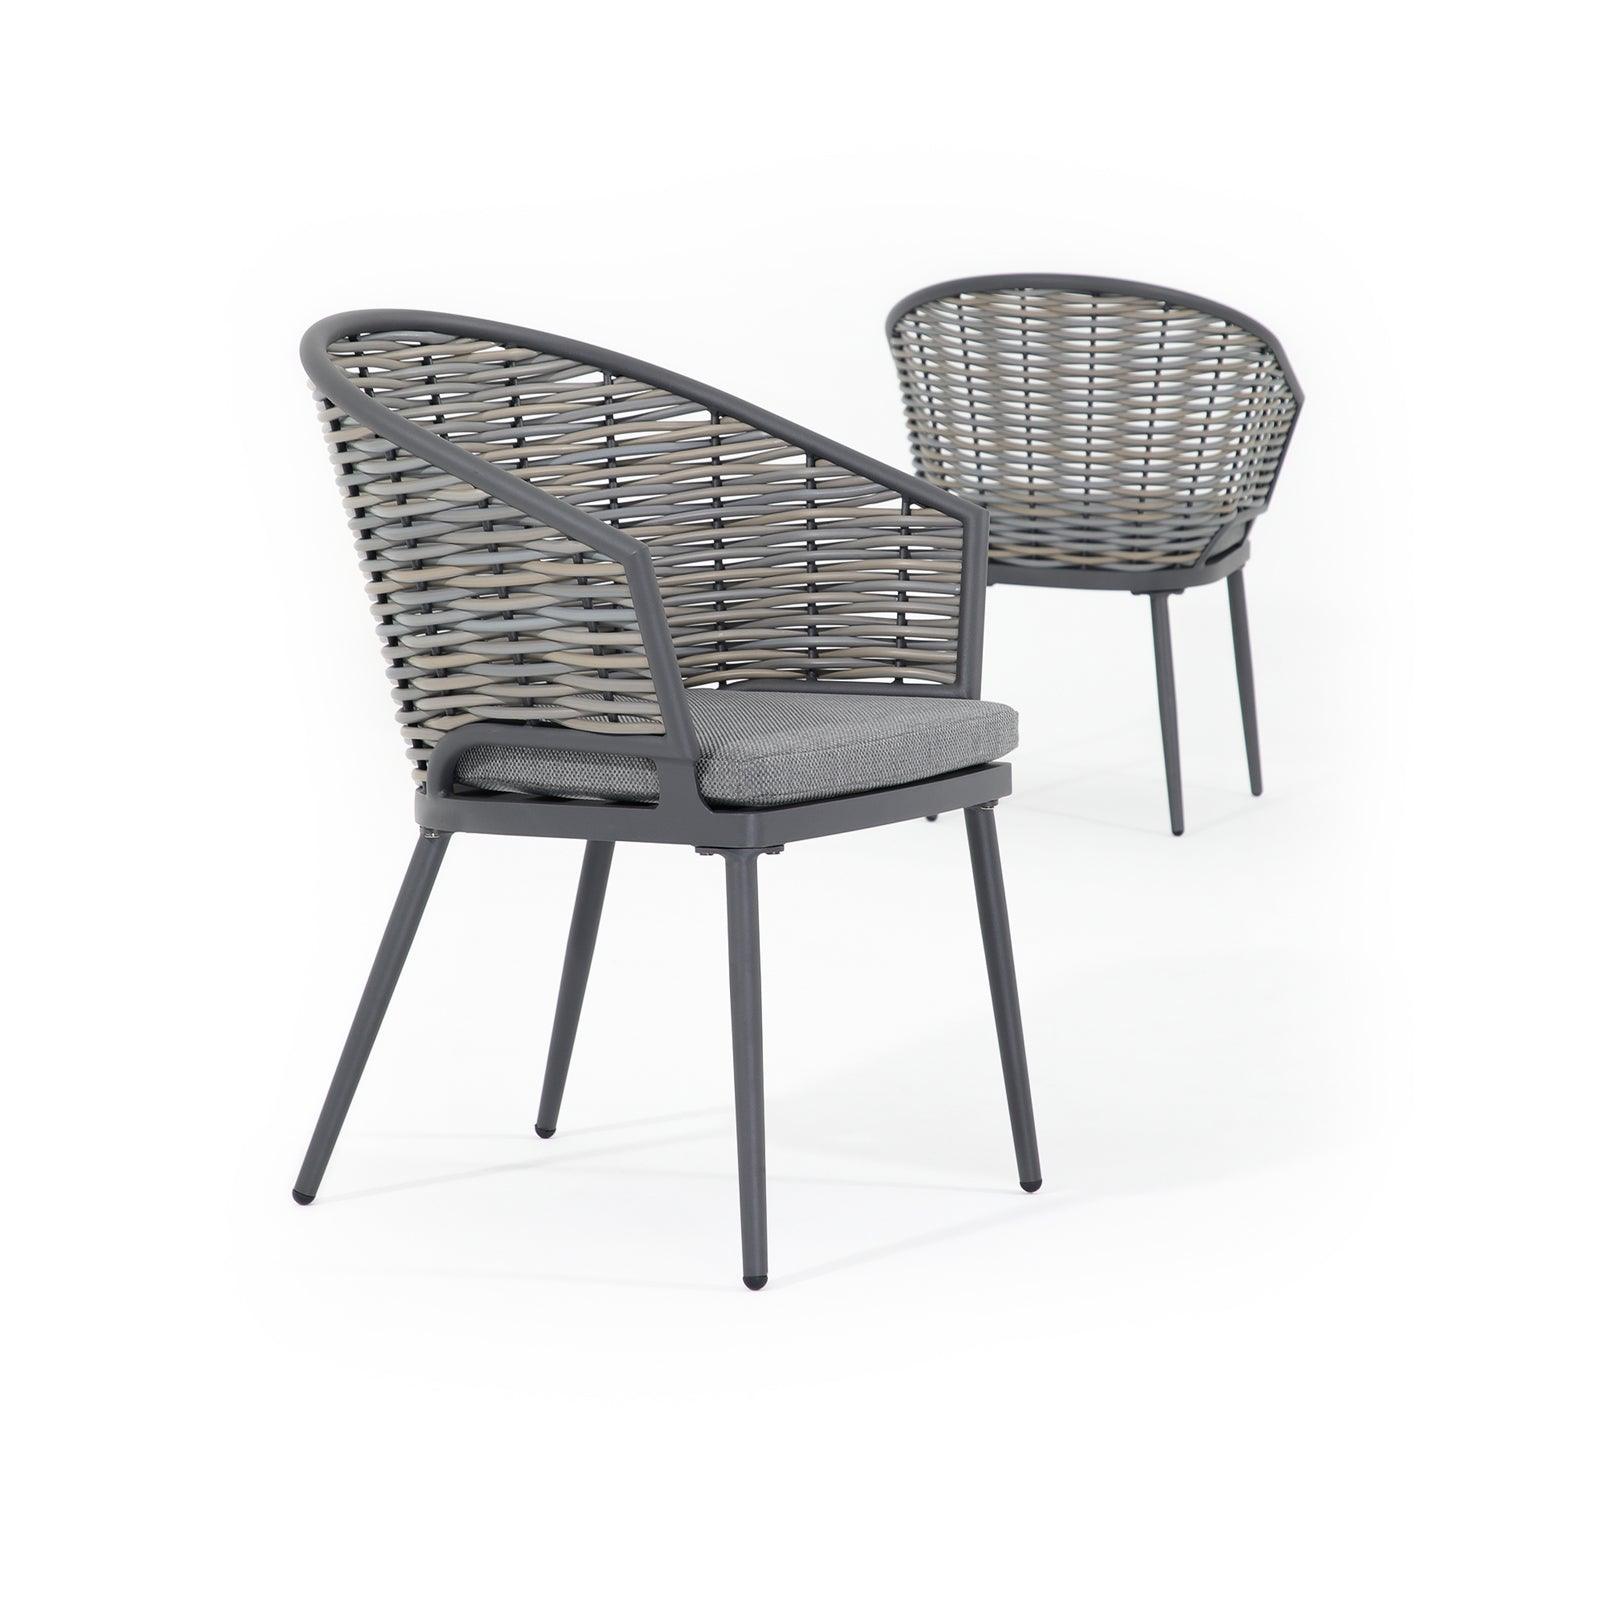 Burano Grey wicker outdoor Dining chairs with aluminum frame, grey cushions, right and back angles- Jardina Furniture #Pieces_2-pc.